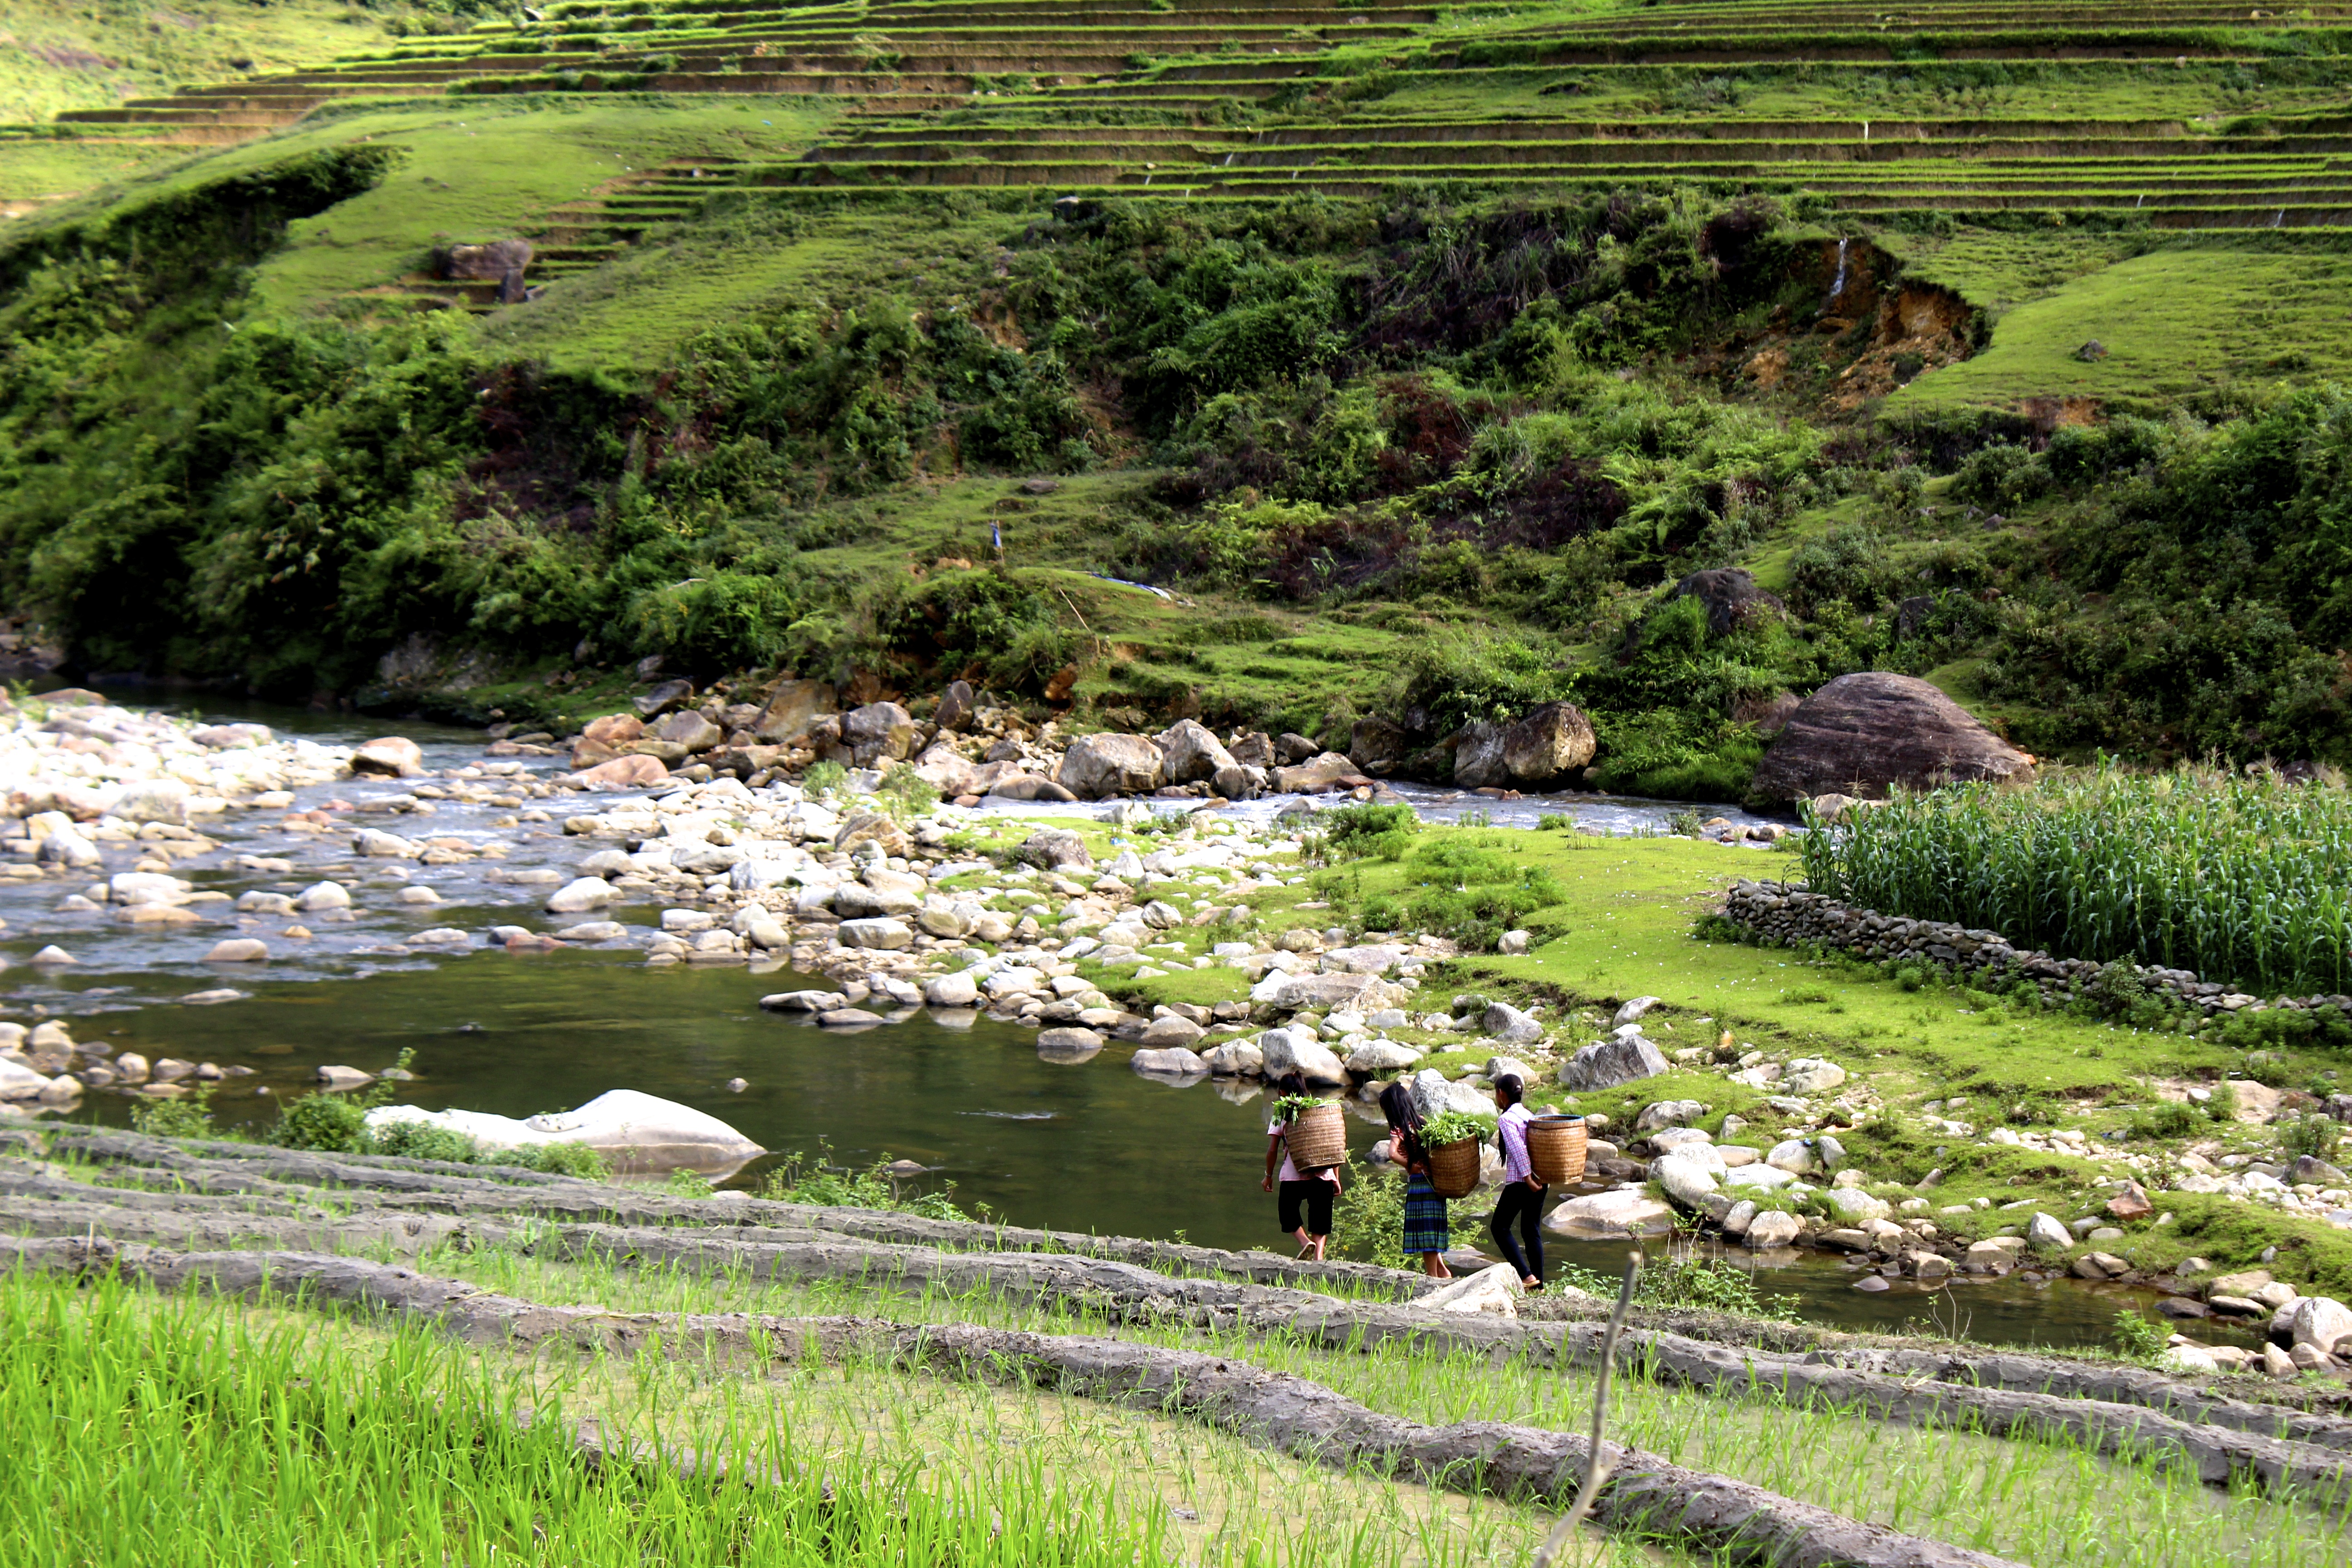 Locals walking through the rice terraces.